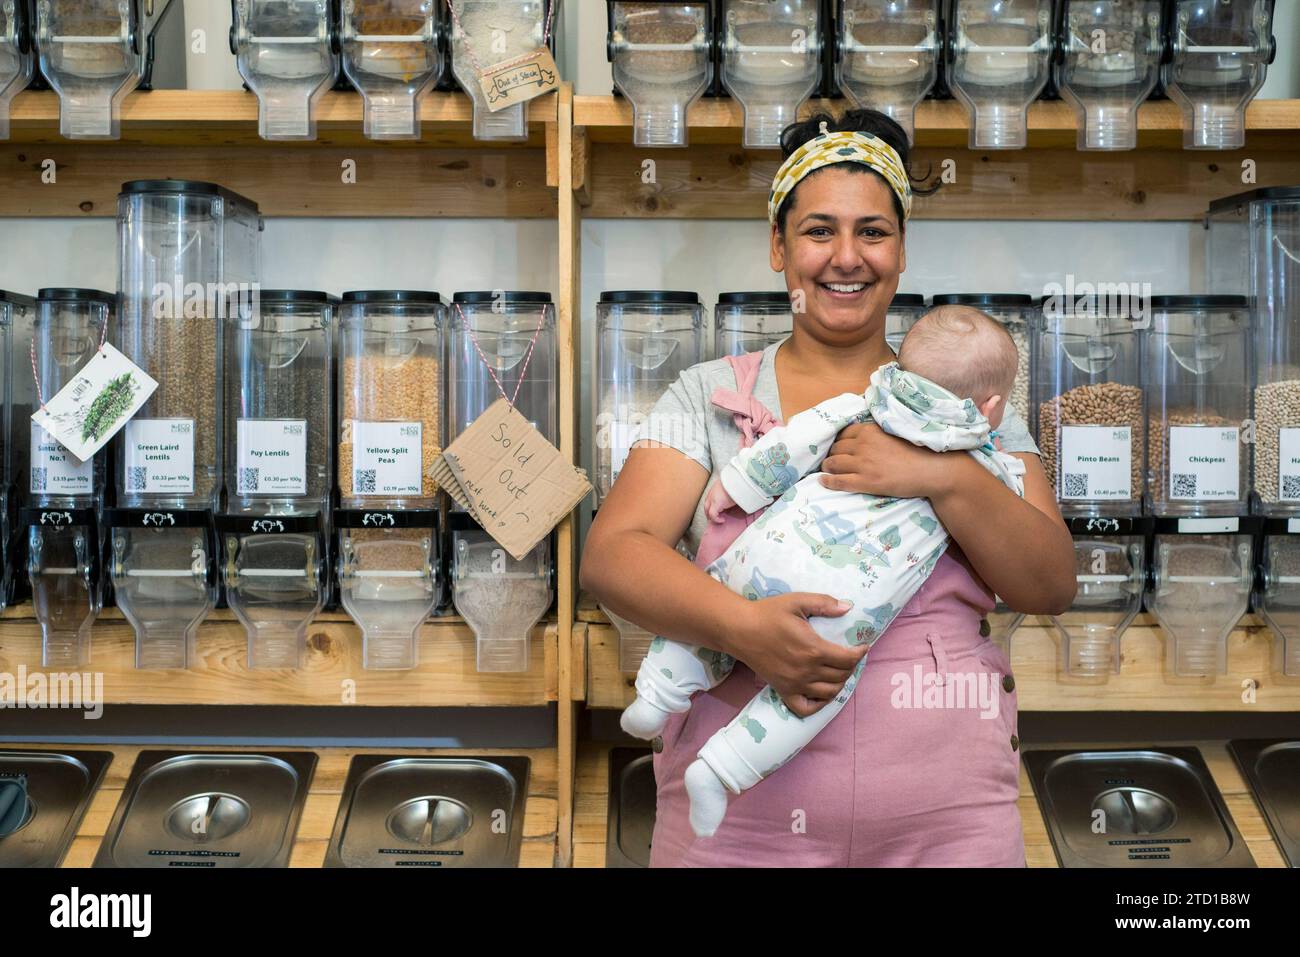 A young woman and business owner stands in her environmentally friendly natural food and drink shop. Stock Photo